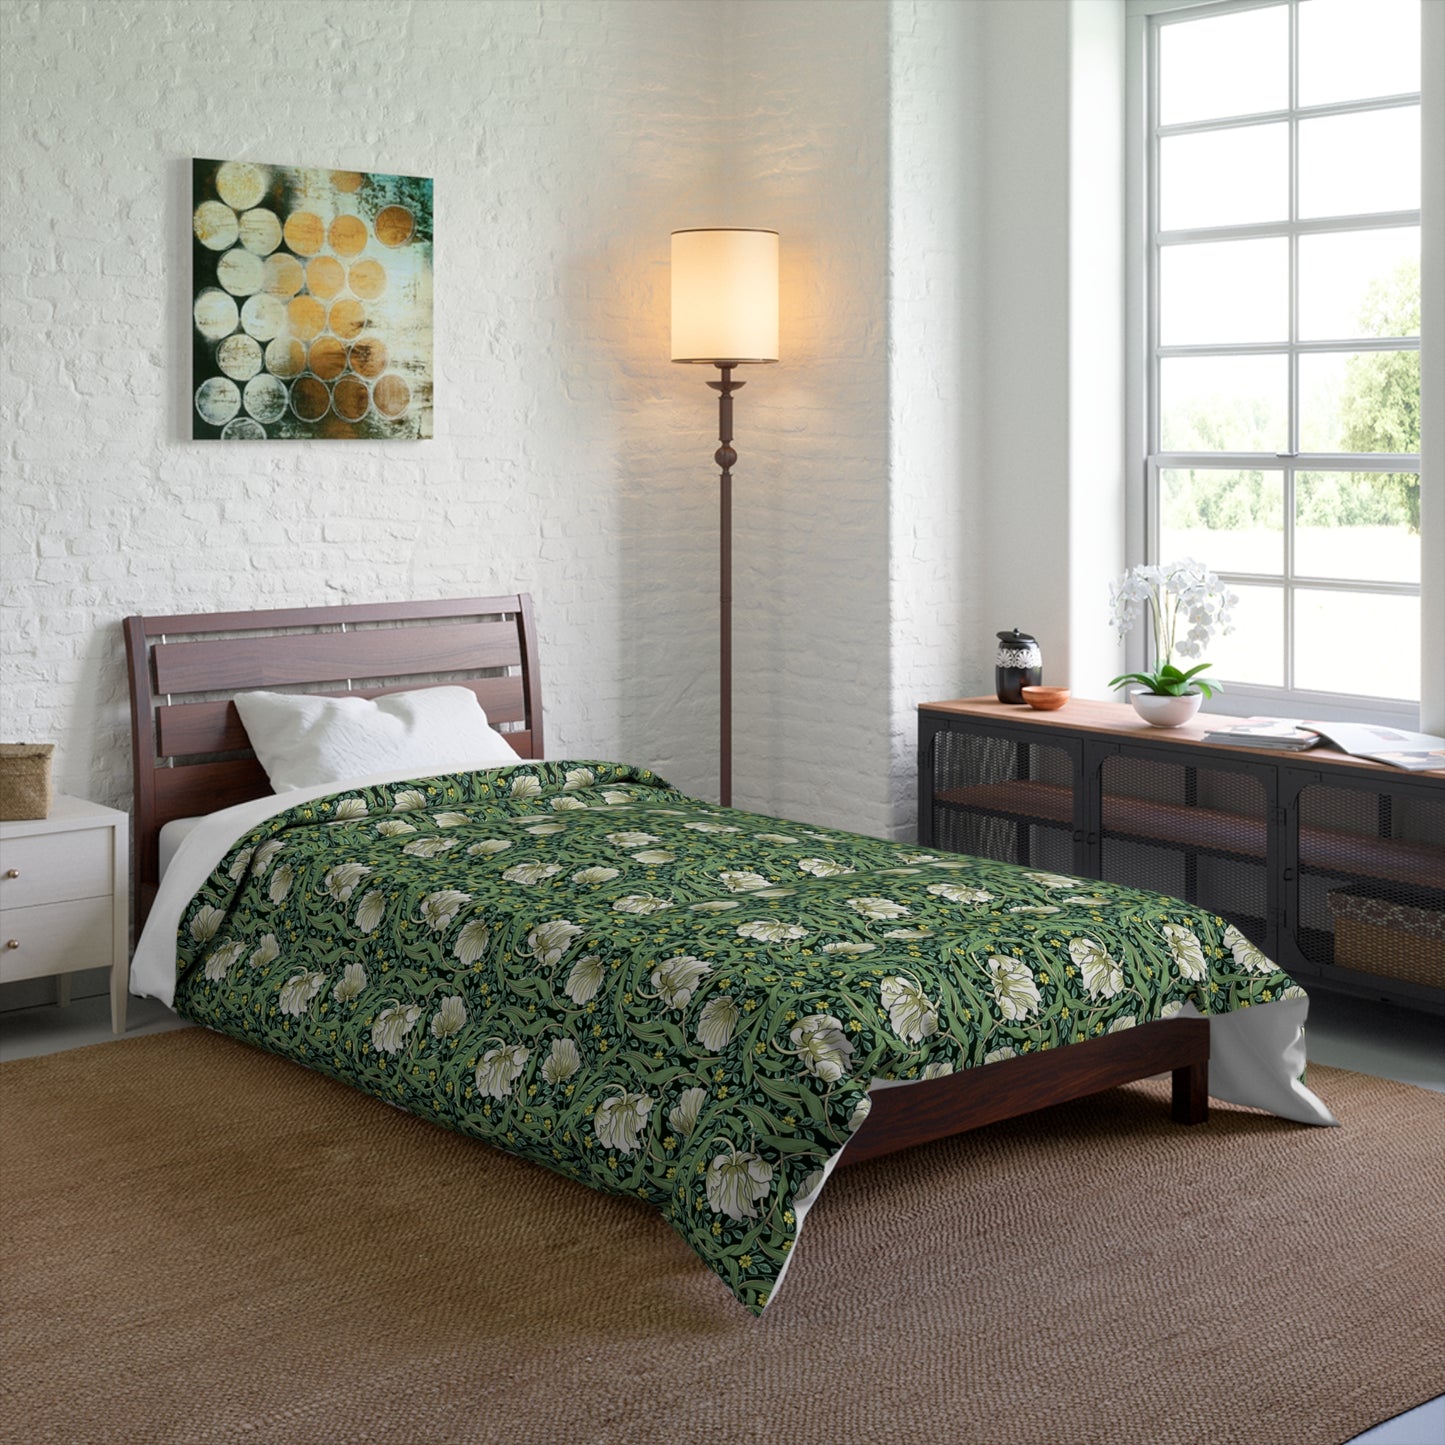 william-morris-co-comforter-pimpernel-collection-green-3